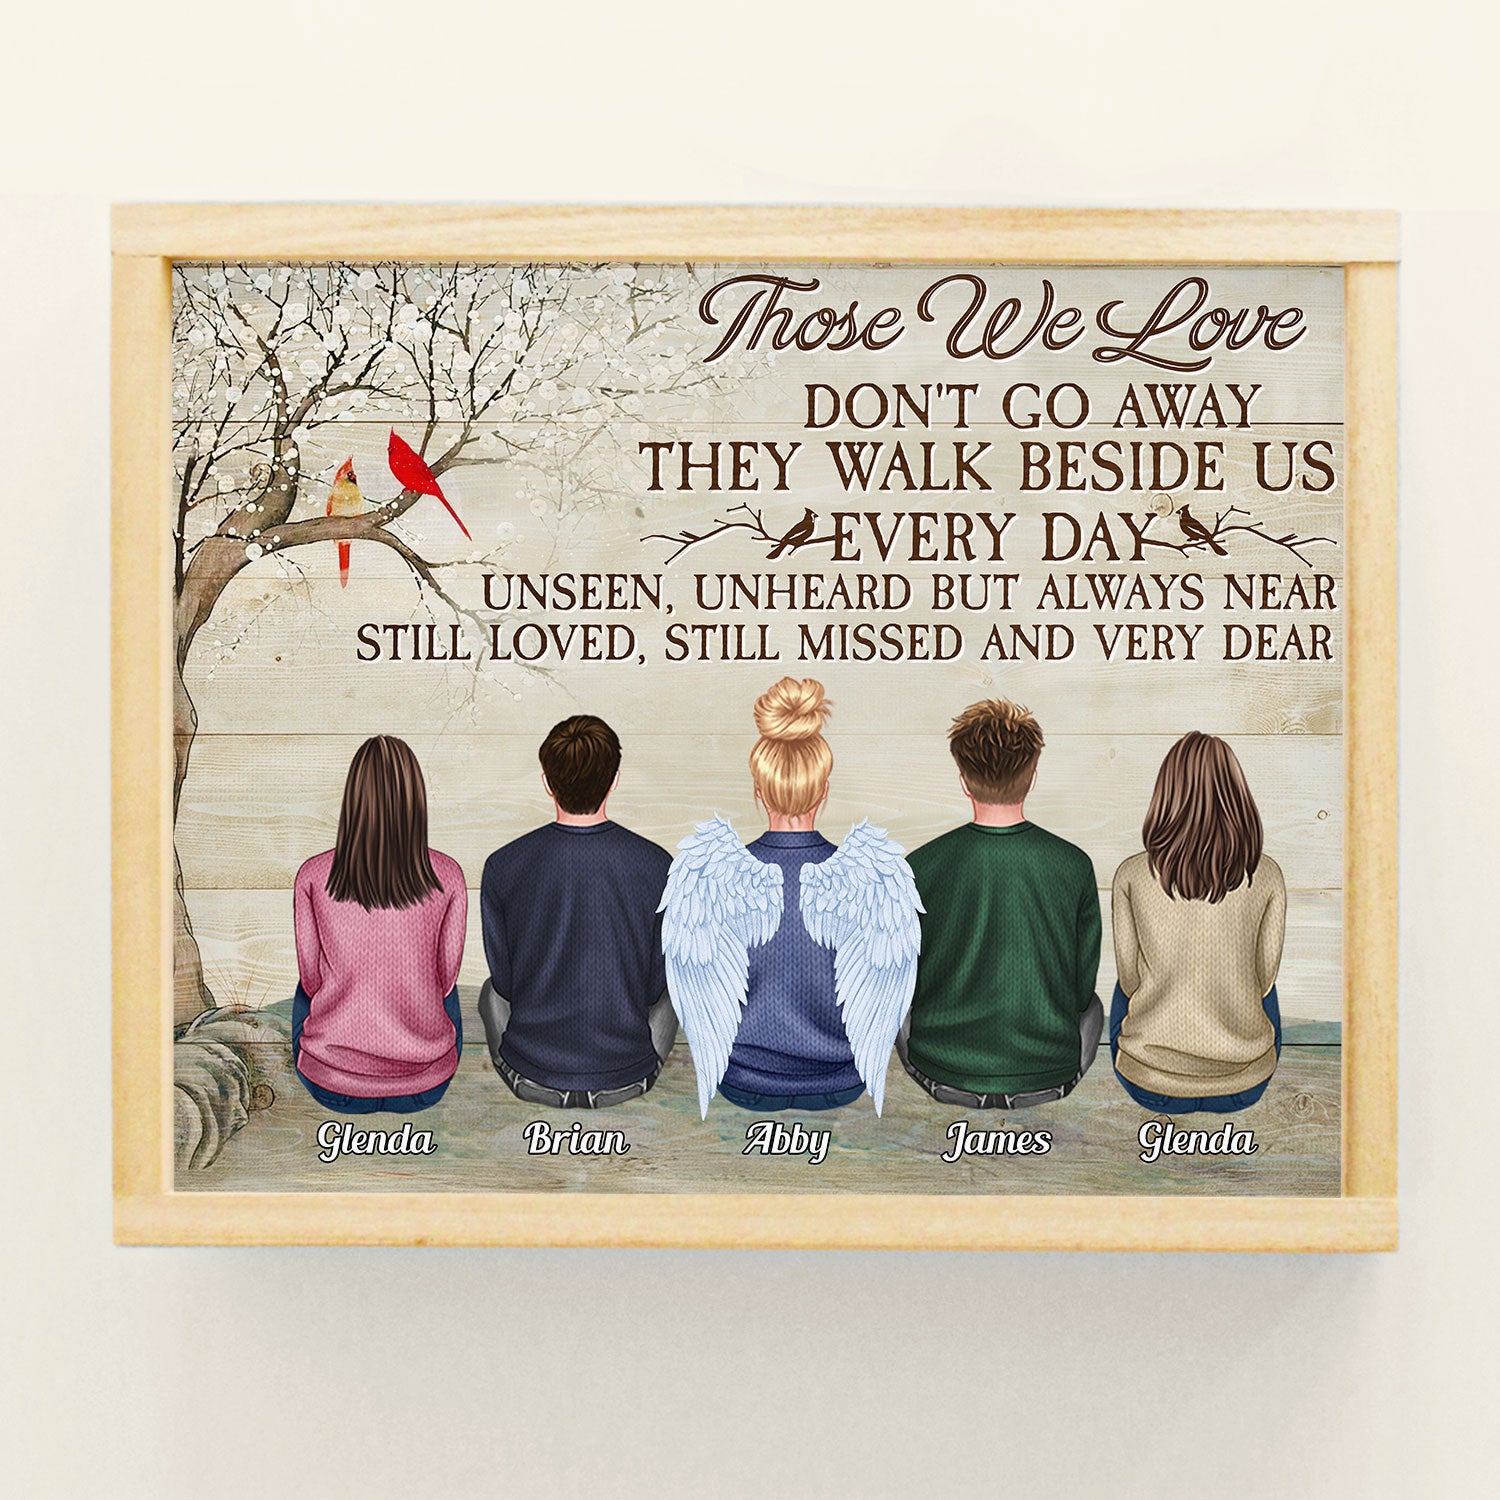 Still Loved Still Missed And Very Dear - Personalized Poster - Memorial Gift Memorial Poster For Family, Children, Spouse.